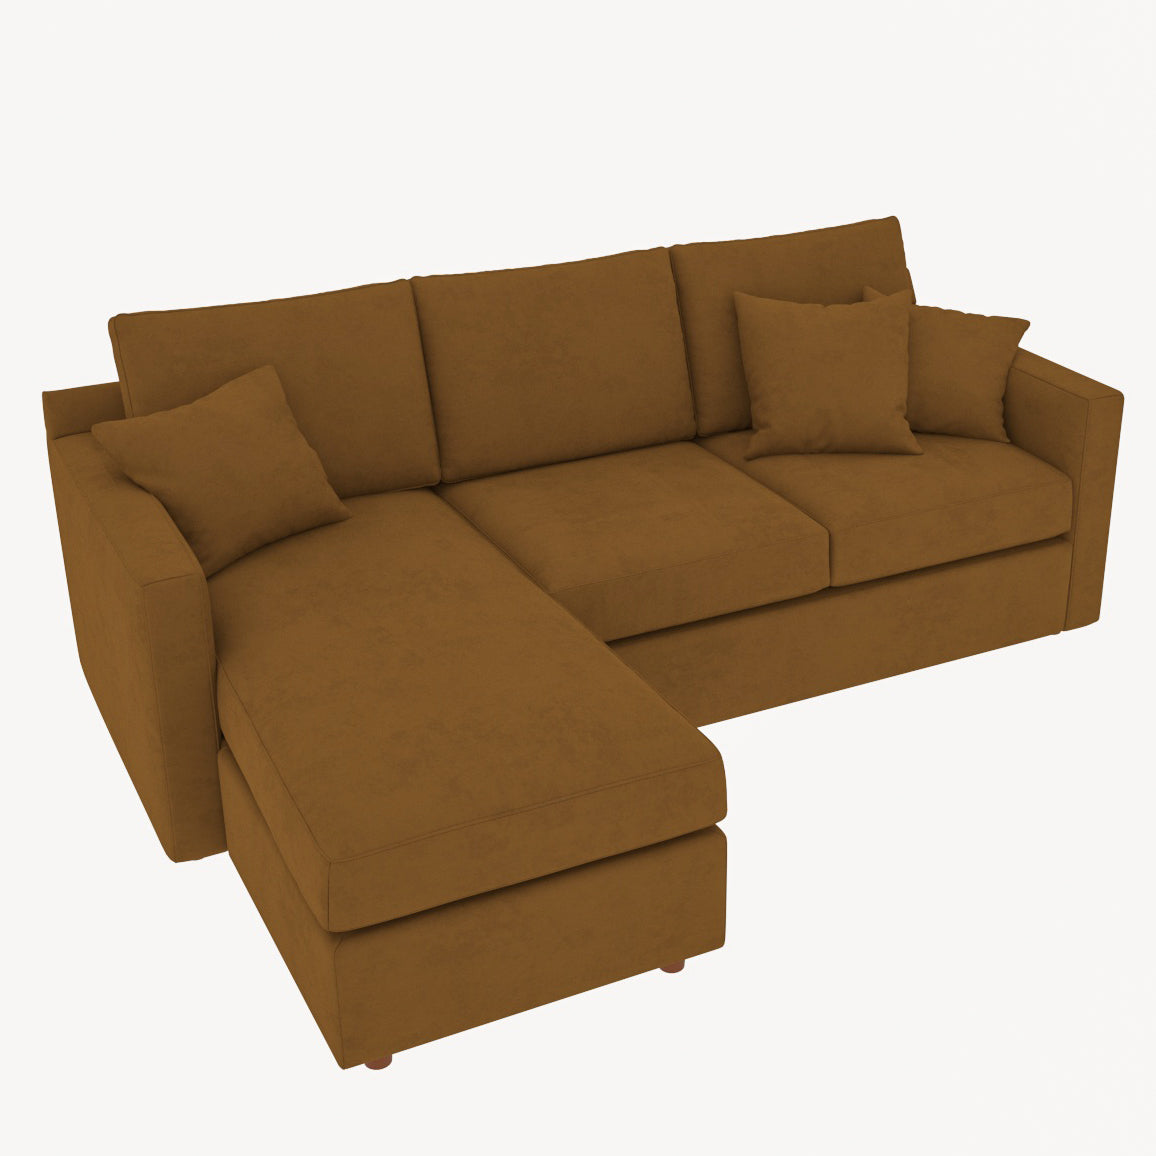 Dry Leaf Coloured with Premium Comfort L Shaped 4 Seater Sofa Set for Home Sofa